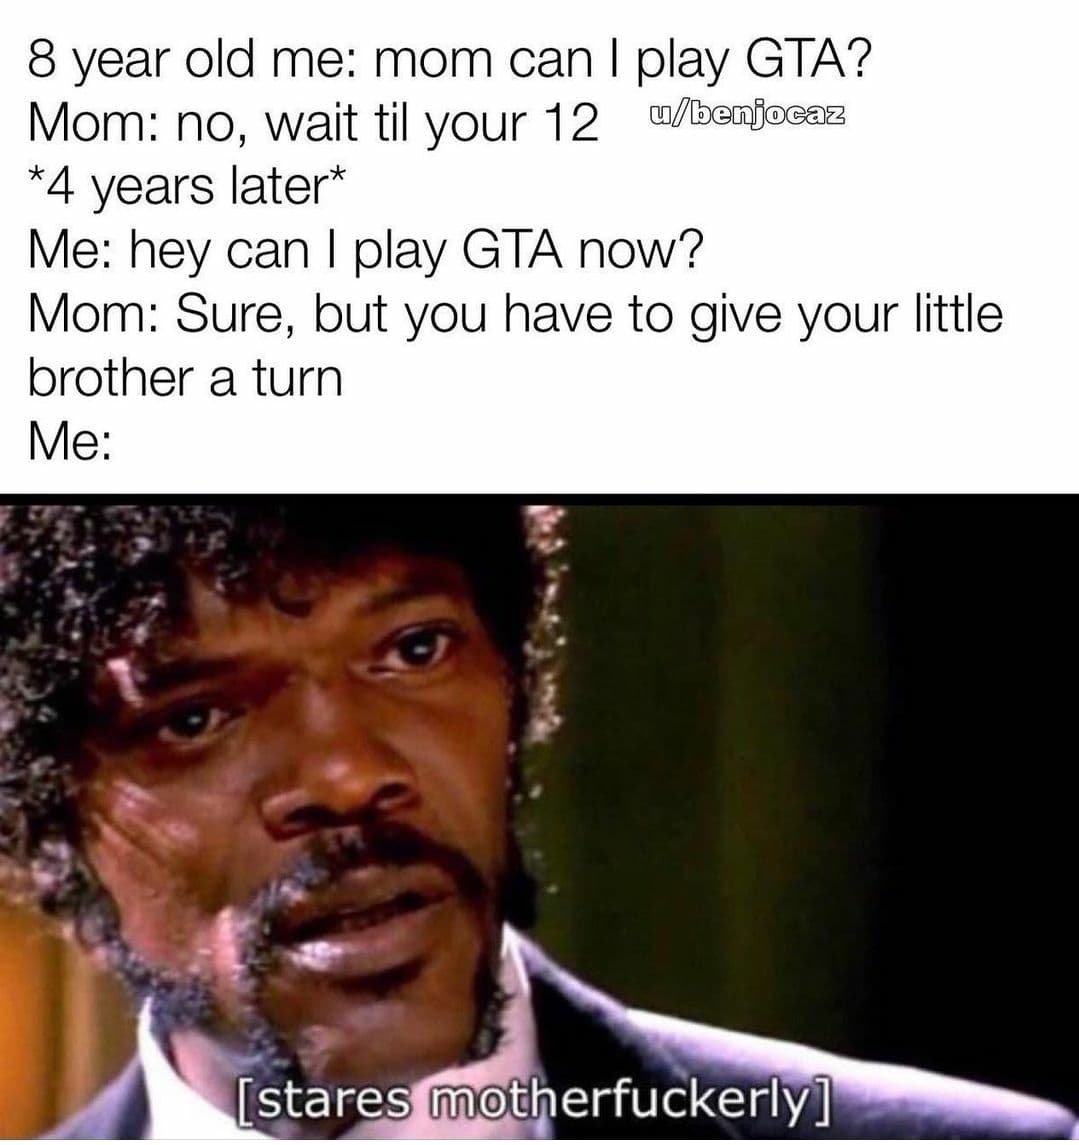 funny gaming memes  - hard headed meme - 8 year old me mom can I play Gta? Mom no, wait til your 12 wbenjocaz 4 years later Me hey can I play Gta now? Mom Sure, but you have to give your little brother a turn Me stares motherfuckerly